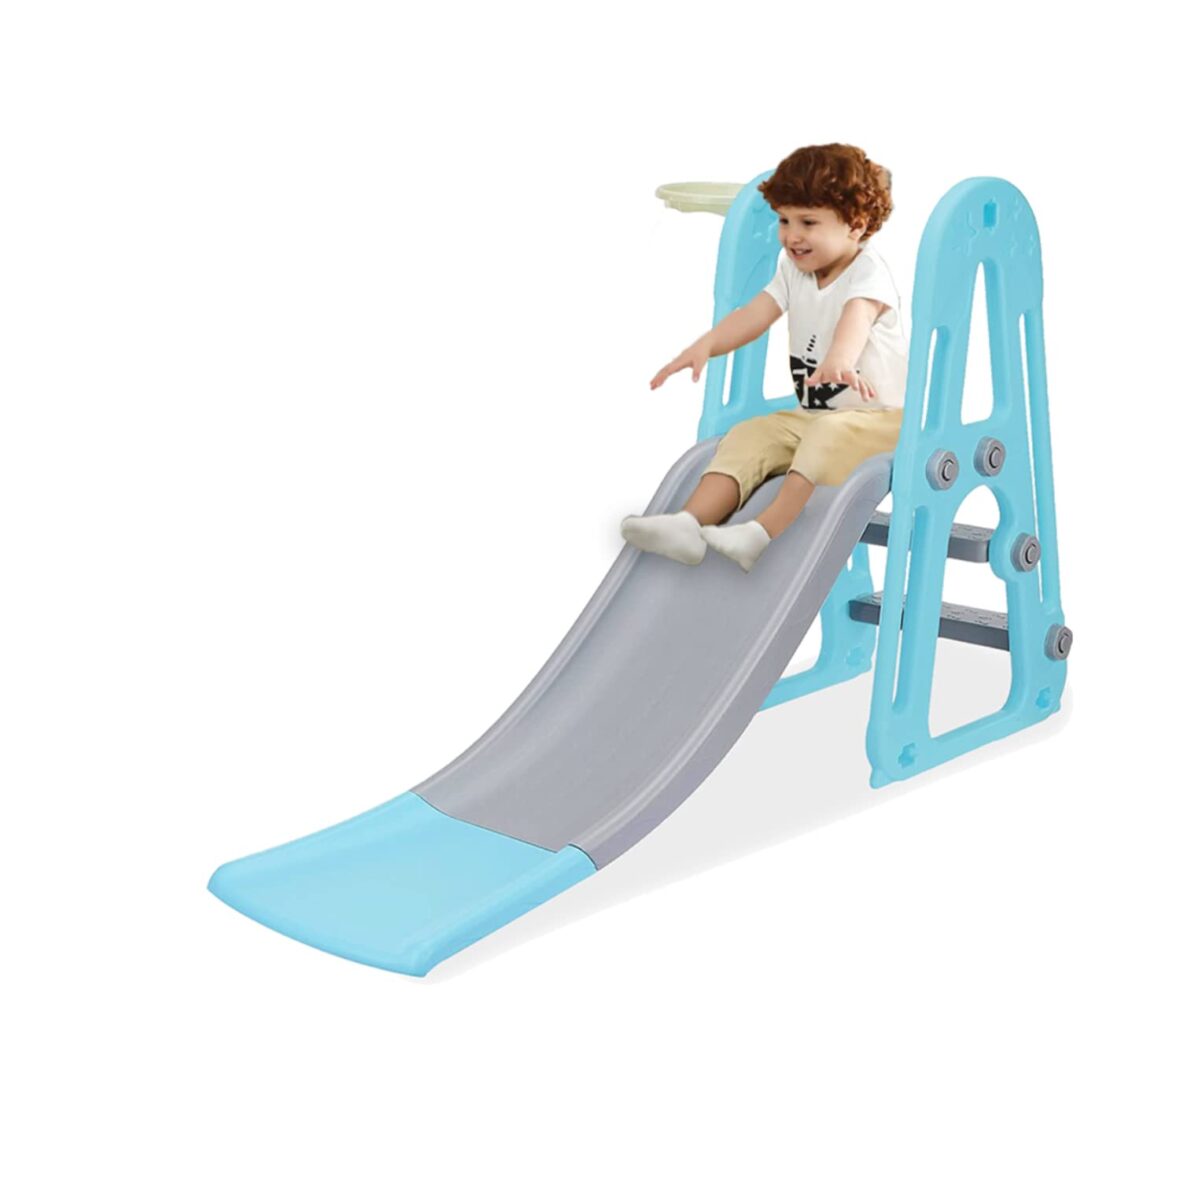 U Smile Garden Slide for Kids – Playgro Super Prime Slider with Extended Buffer -For Boys and Girls Perfect Slides / Toys for Home, Indoor or Outdoor 1 Year to 5 Years – L140 x B62 x H85 cms (Super Slider)